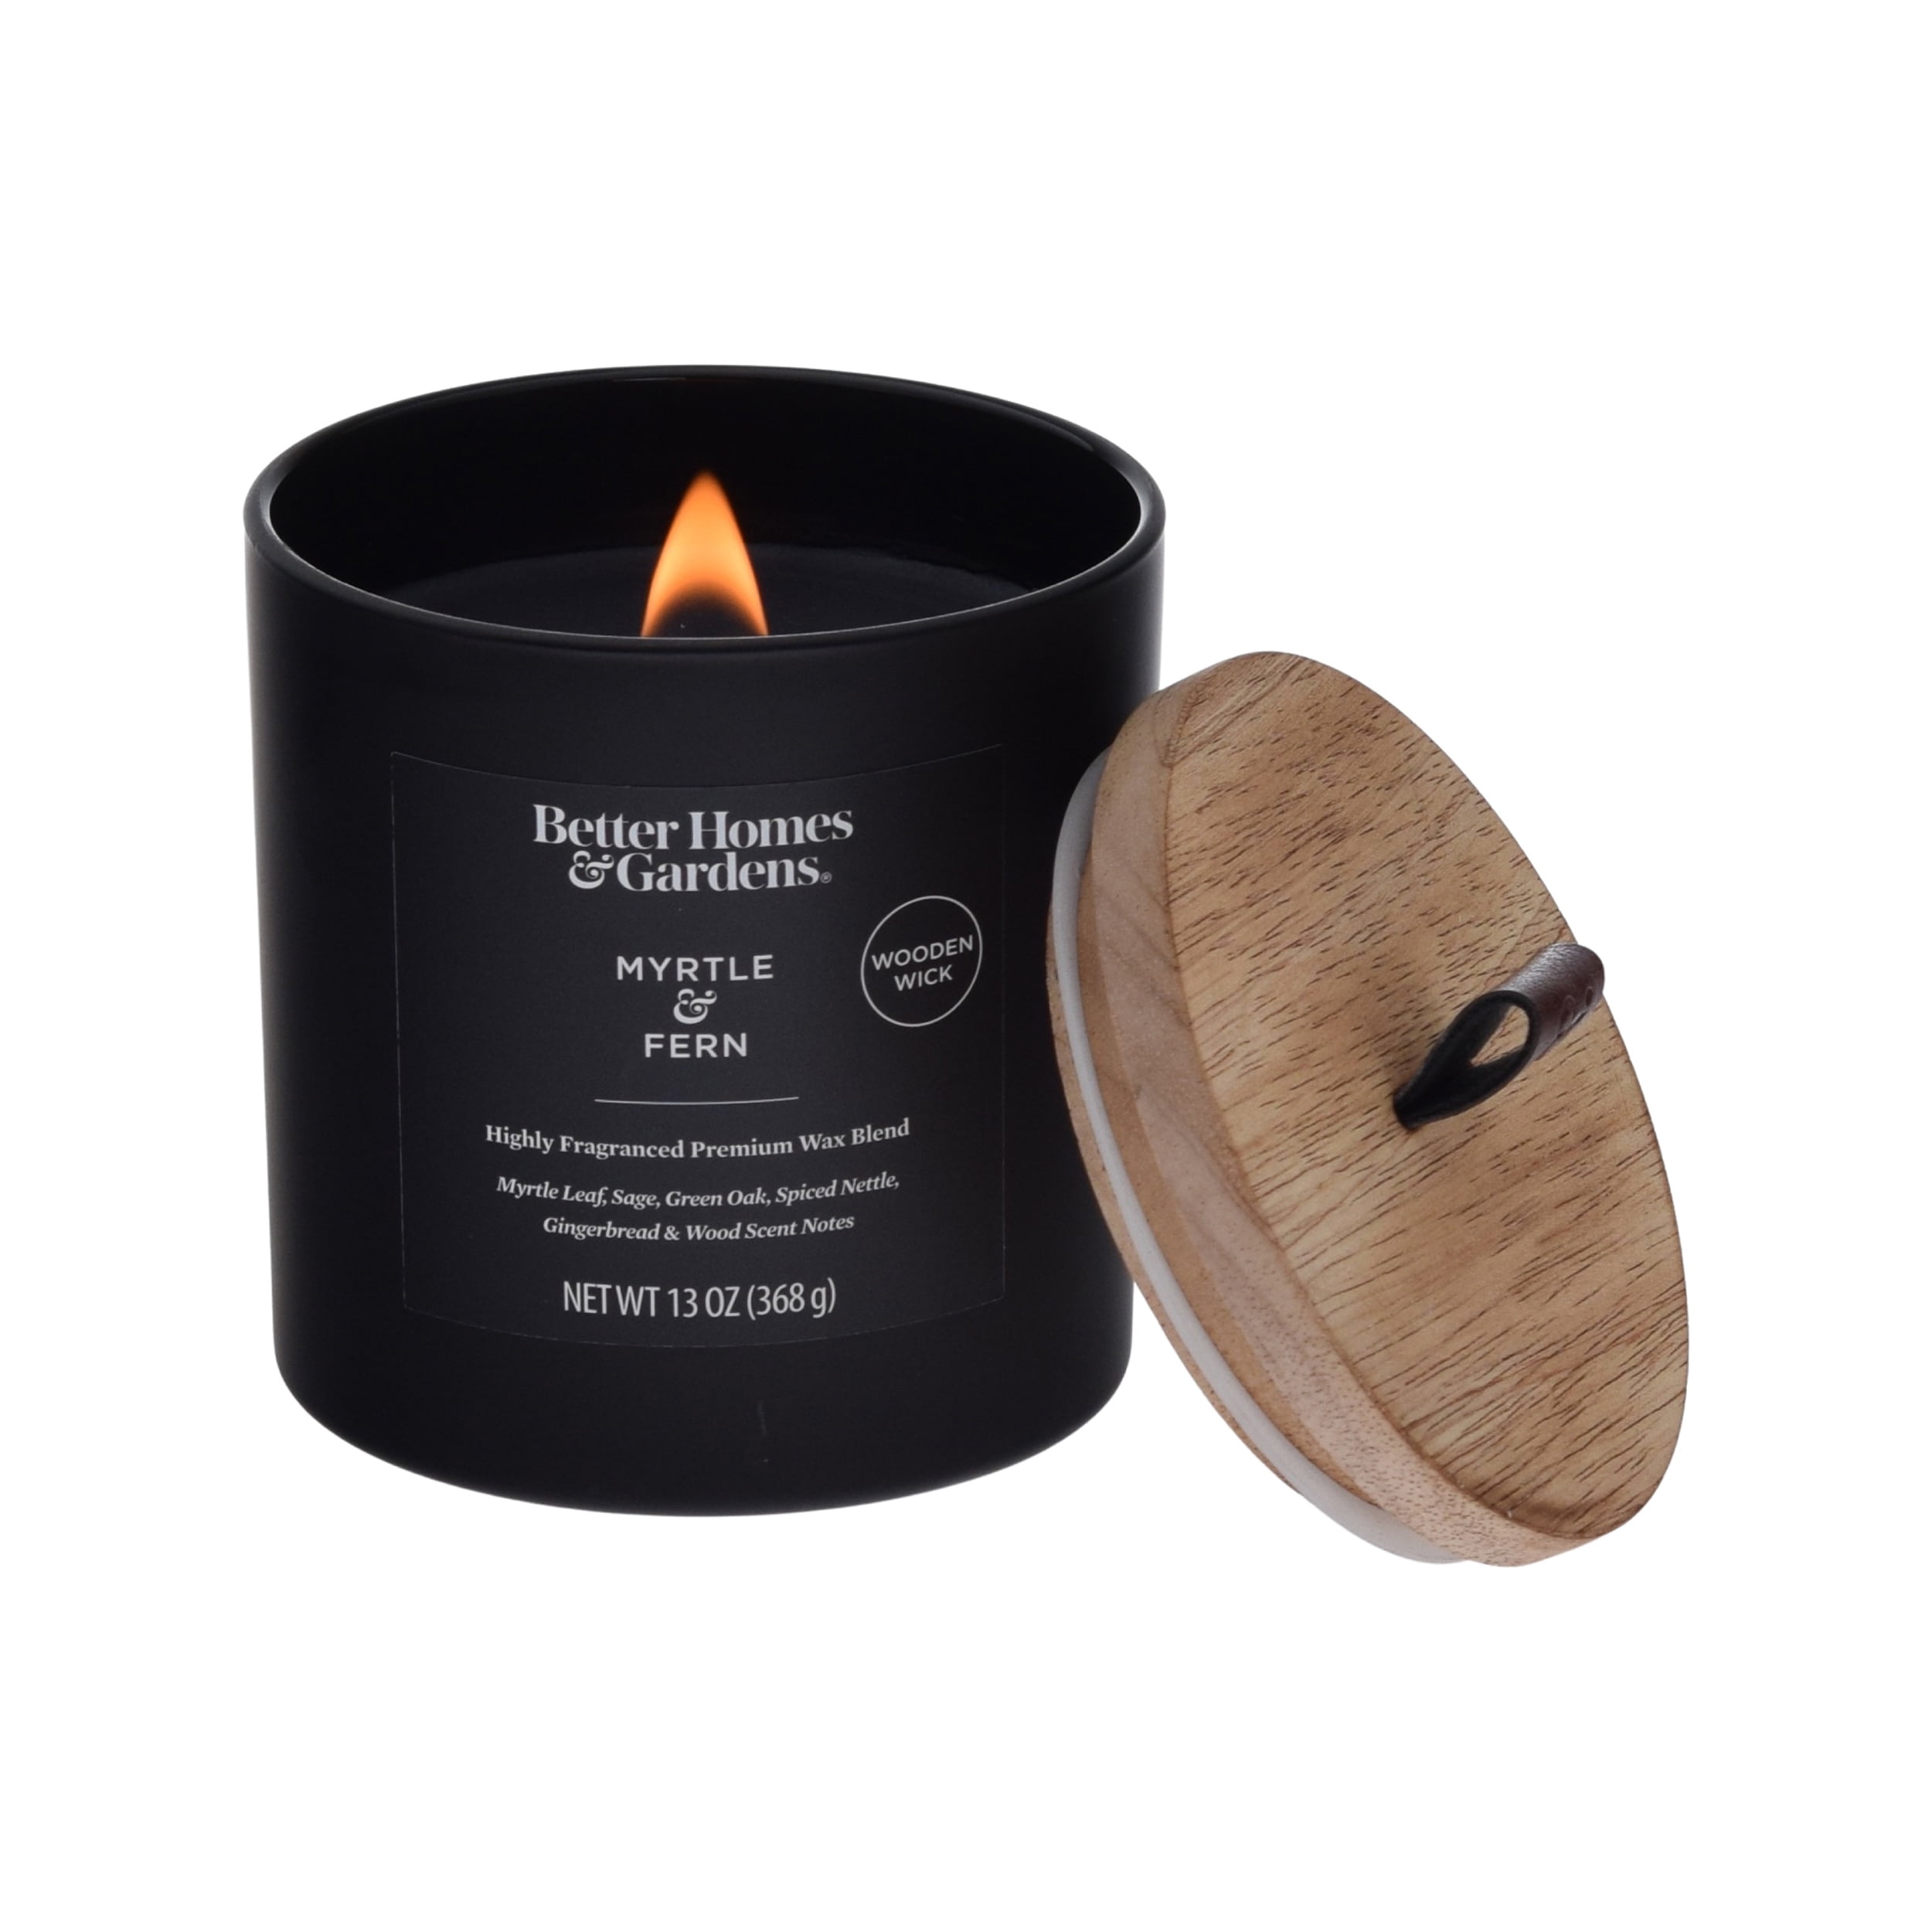 MATTE BLACK GLASS CANDLE WITH WOOD LID - CHOOSE YOUR FAVORITE SCENT -  Cottage Candle Co (TM)